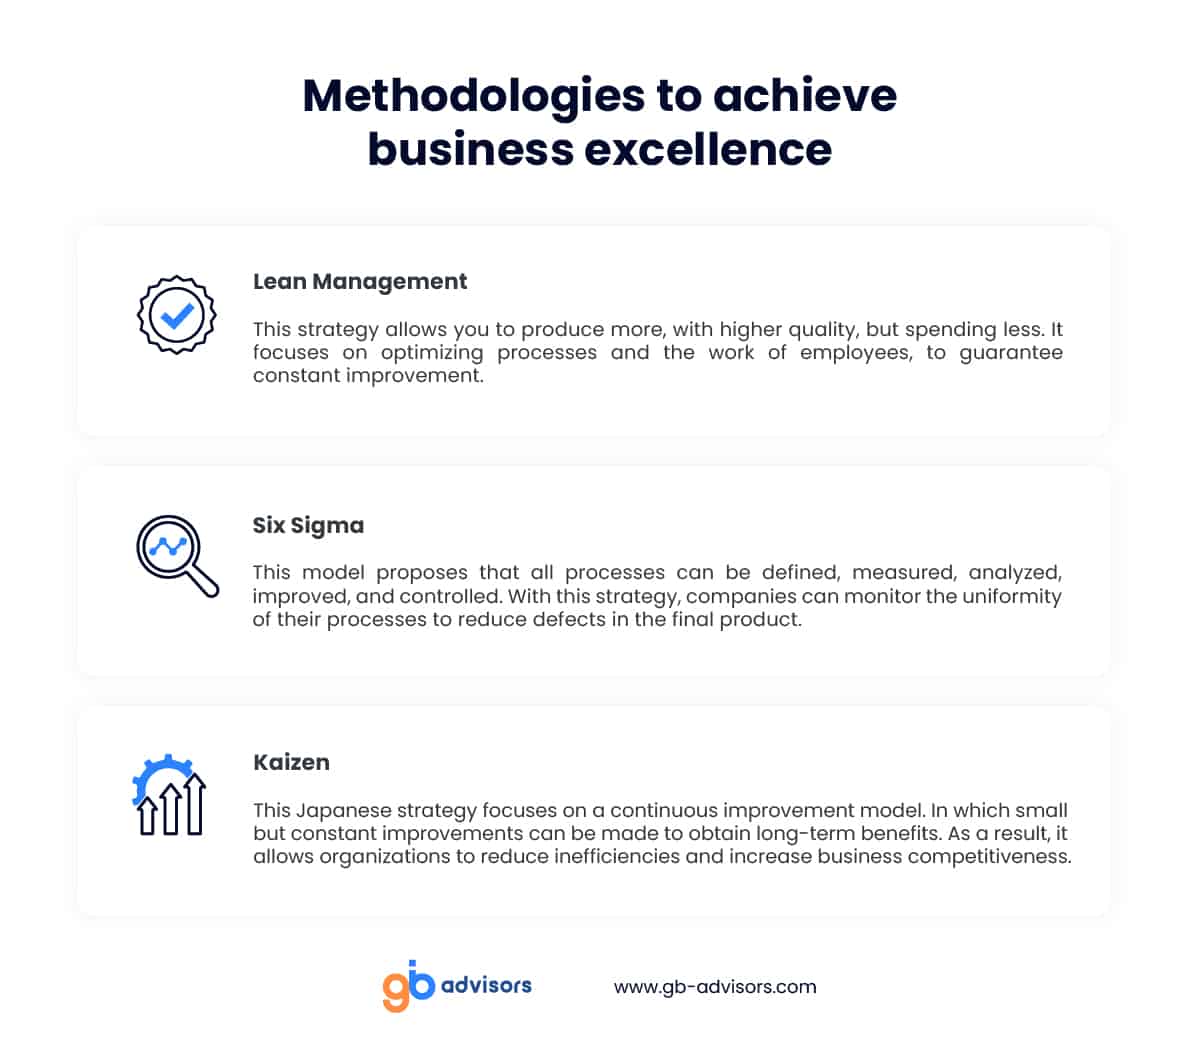 Methodologies to achieve business excellence